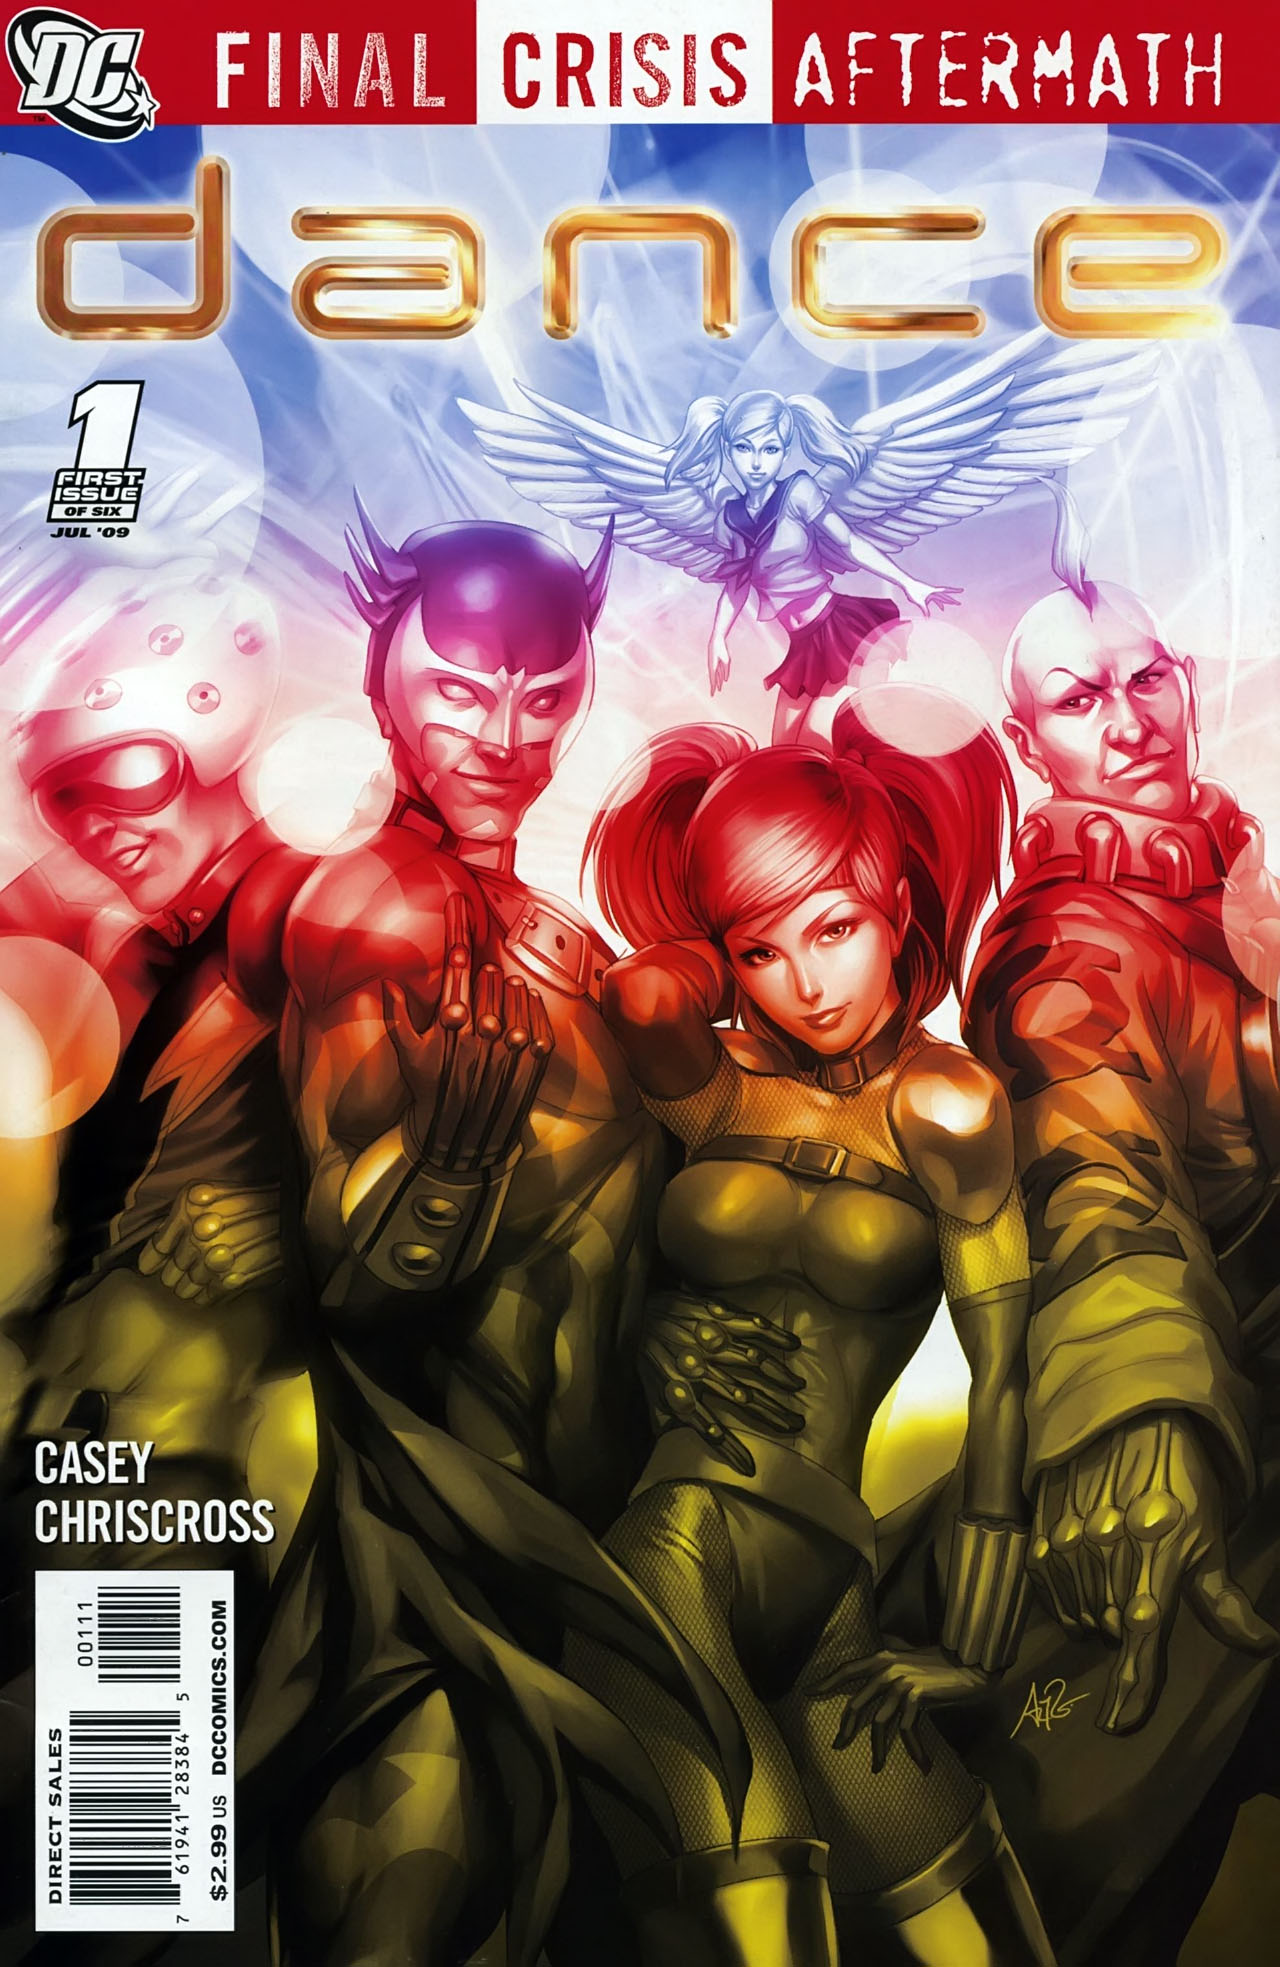 Read online Final Crisis Aftermath: Dance comic -  Issue #1 - 1